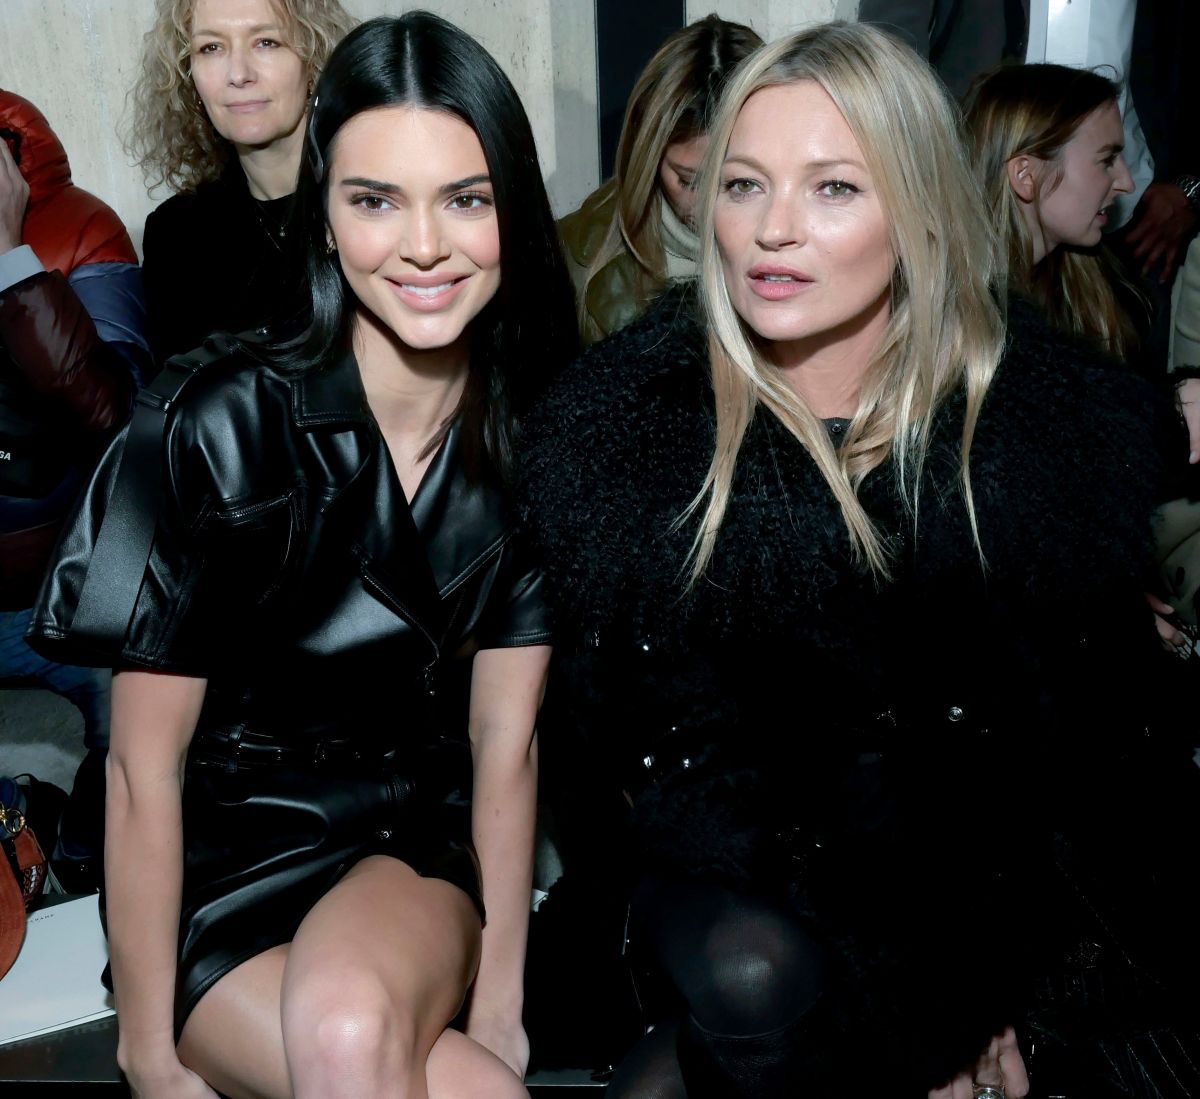 kendall-jenner-emma-roberts-and-kate-moss-at-longchamp-show-at-nyfw-in-new-york-02-09-2019-7.jpg